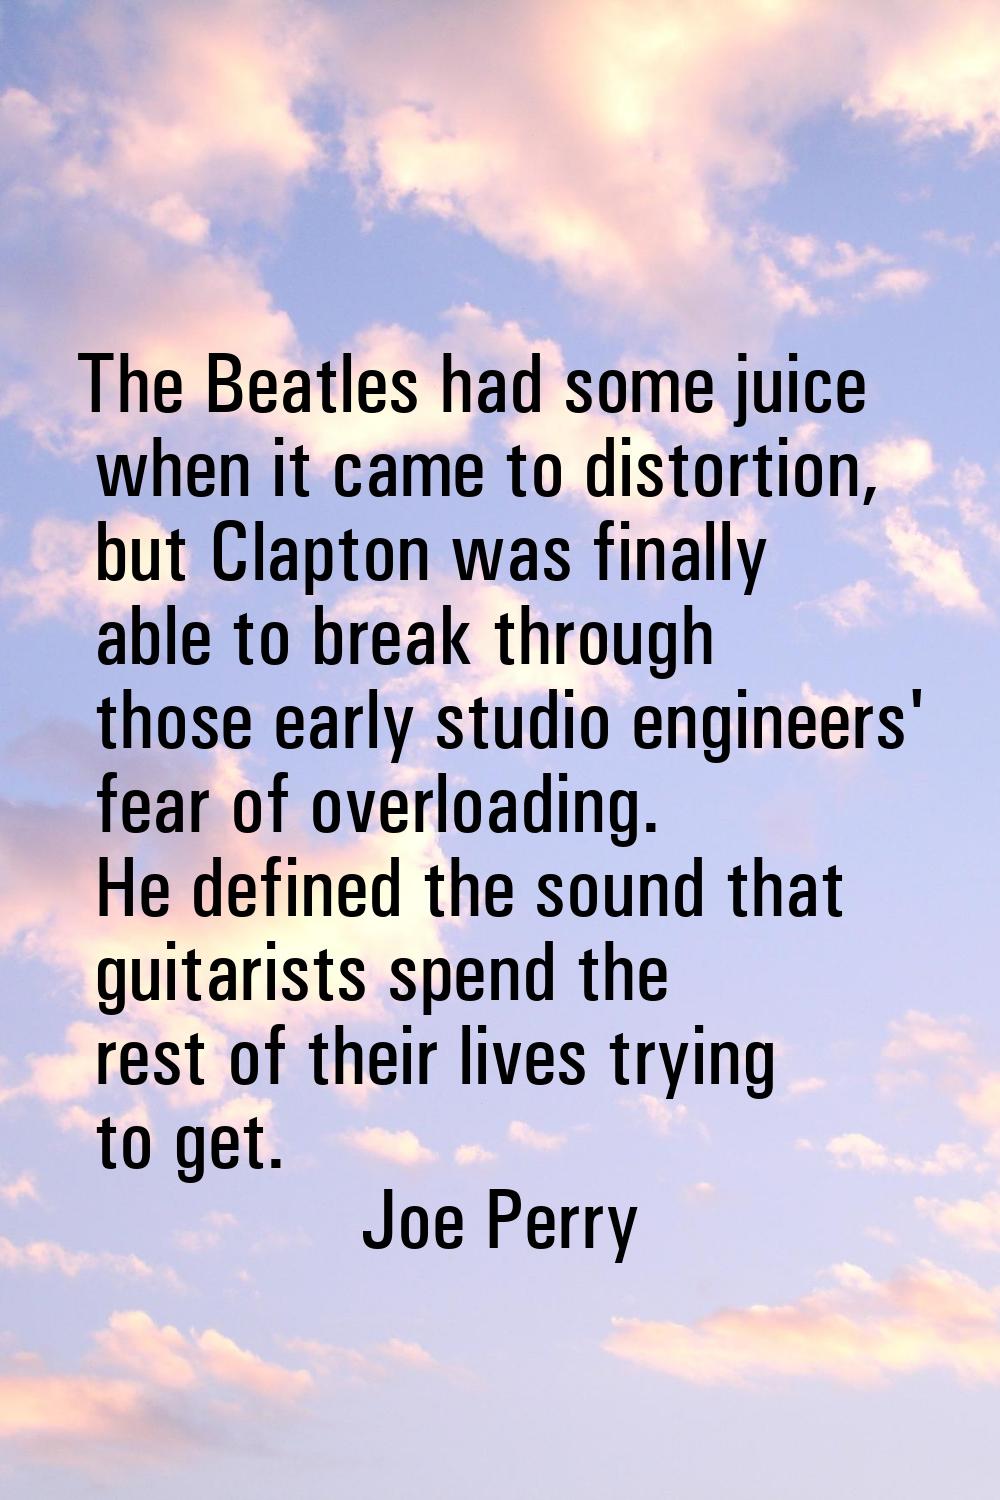 The Beatles had some juice when it came to distortion, but Clapton was finally able to break throug